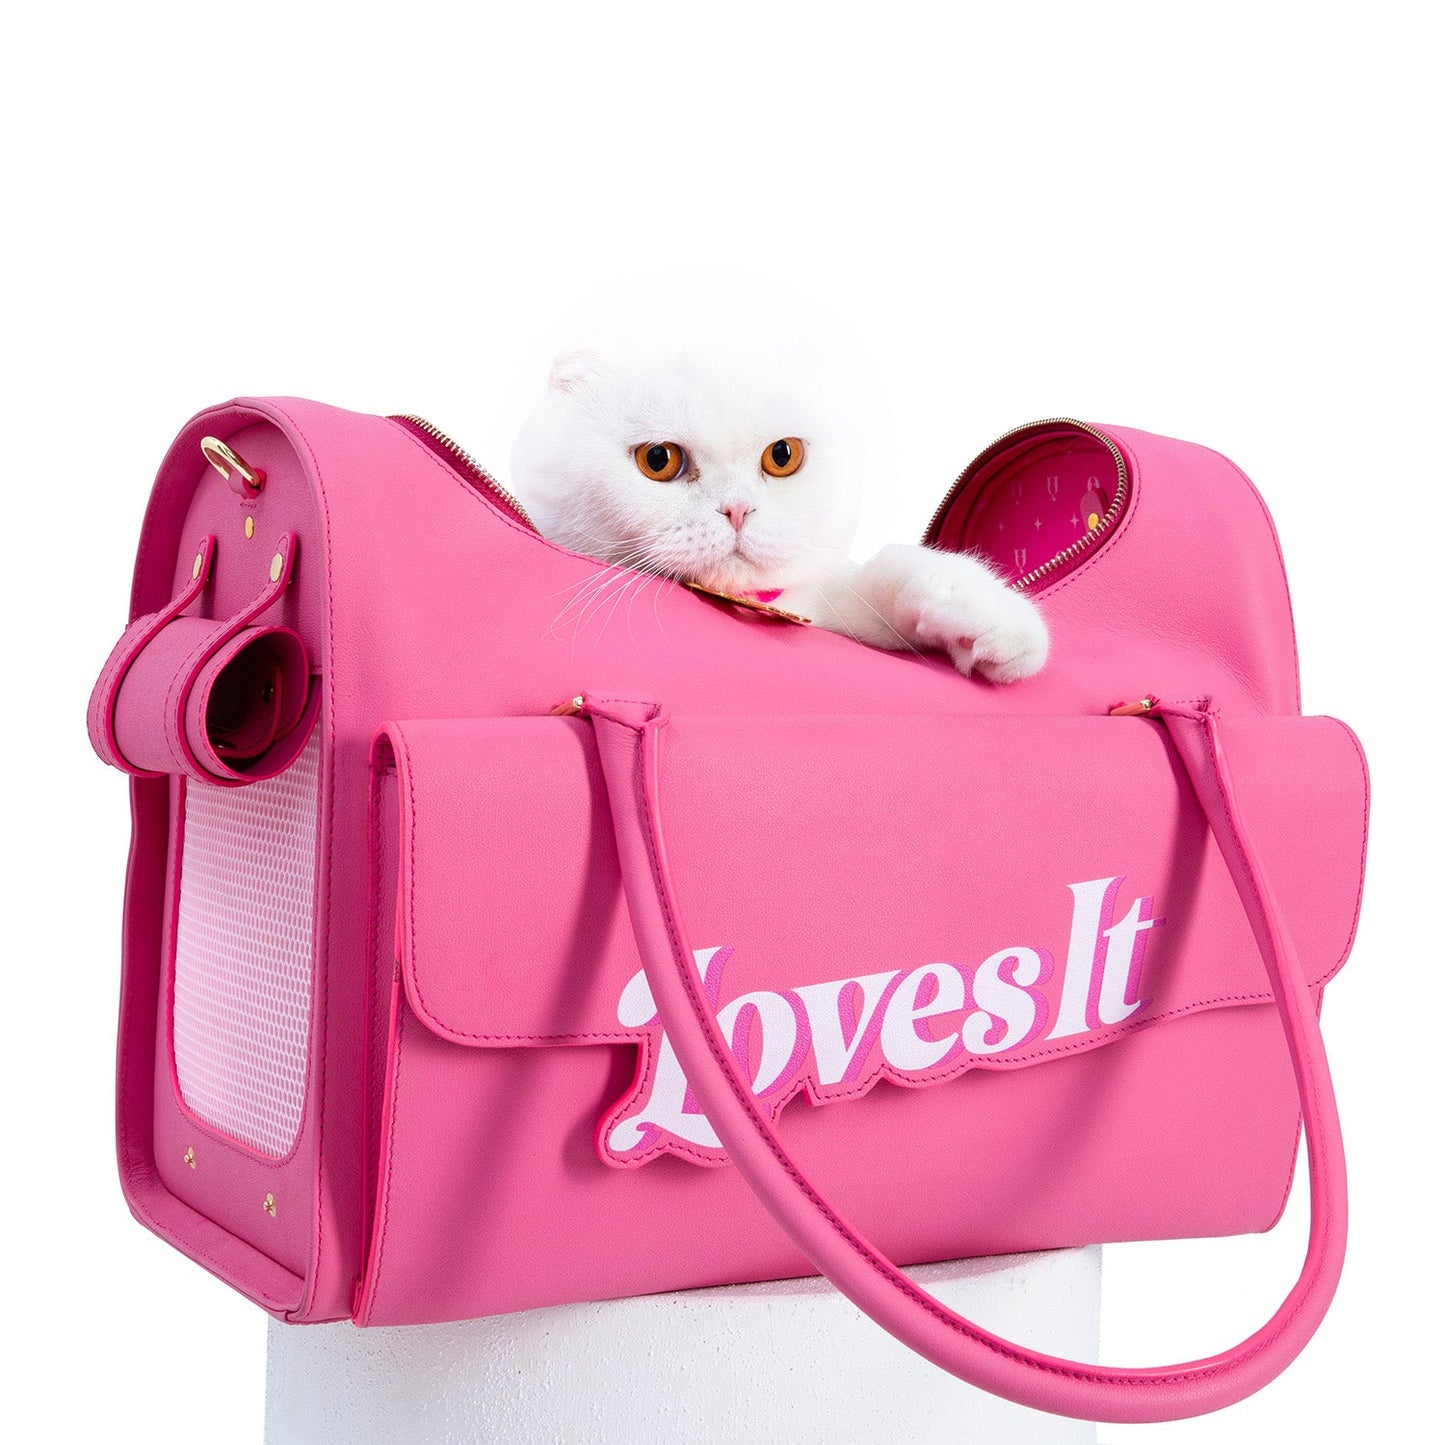 Loves It Cat Carrier by Moshiqa